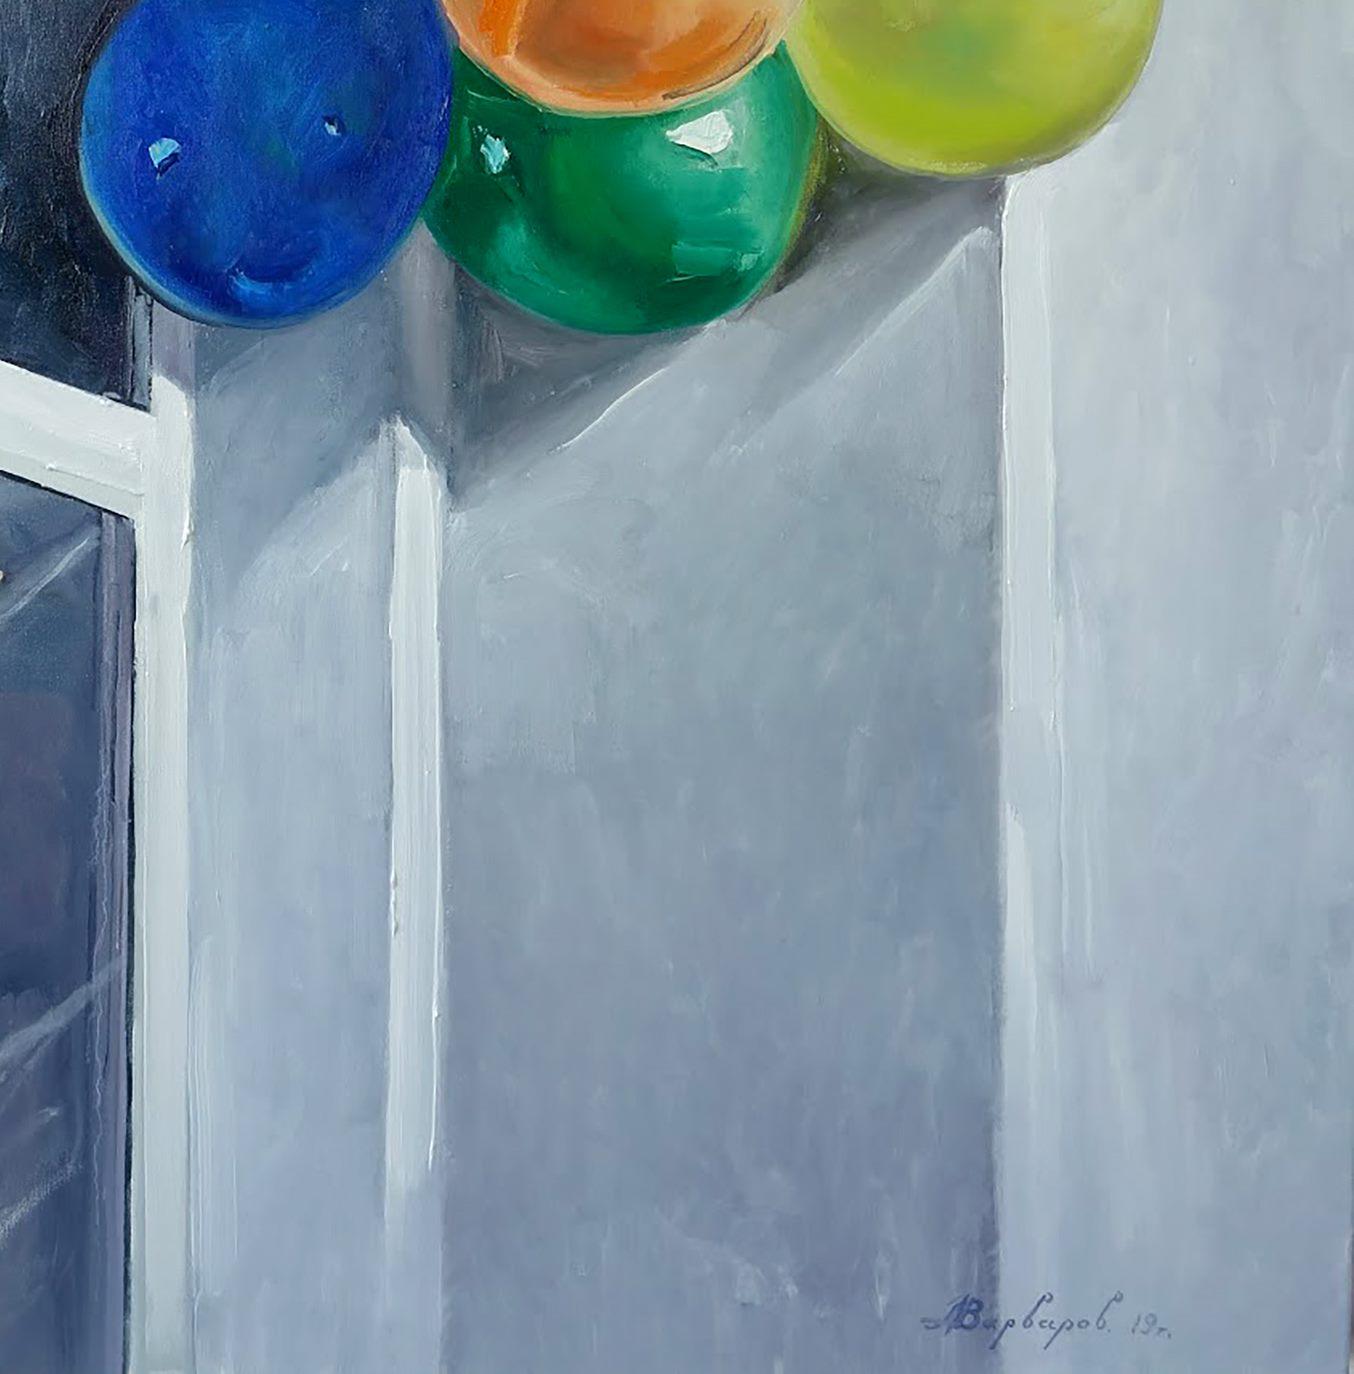 After the Holiday, Balloons Contemporary Art Original oil Painting One of a Kind - Gray Interior Painting by Anatoly Varvarov Viktorovich